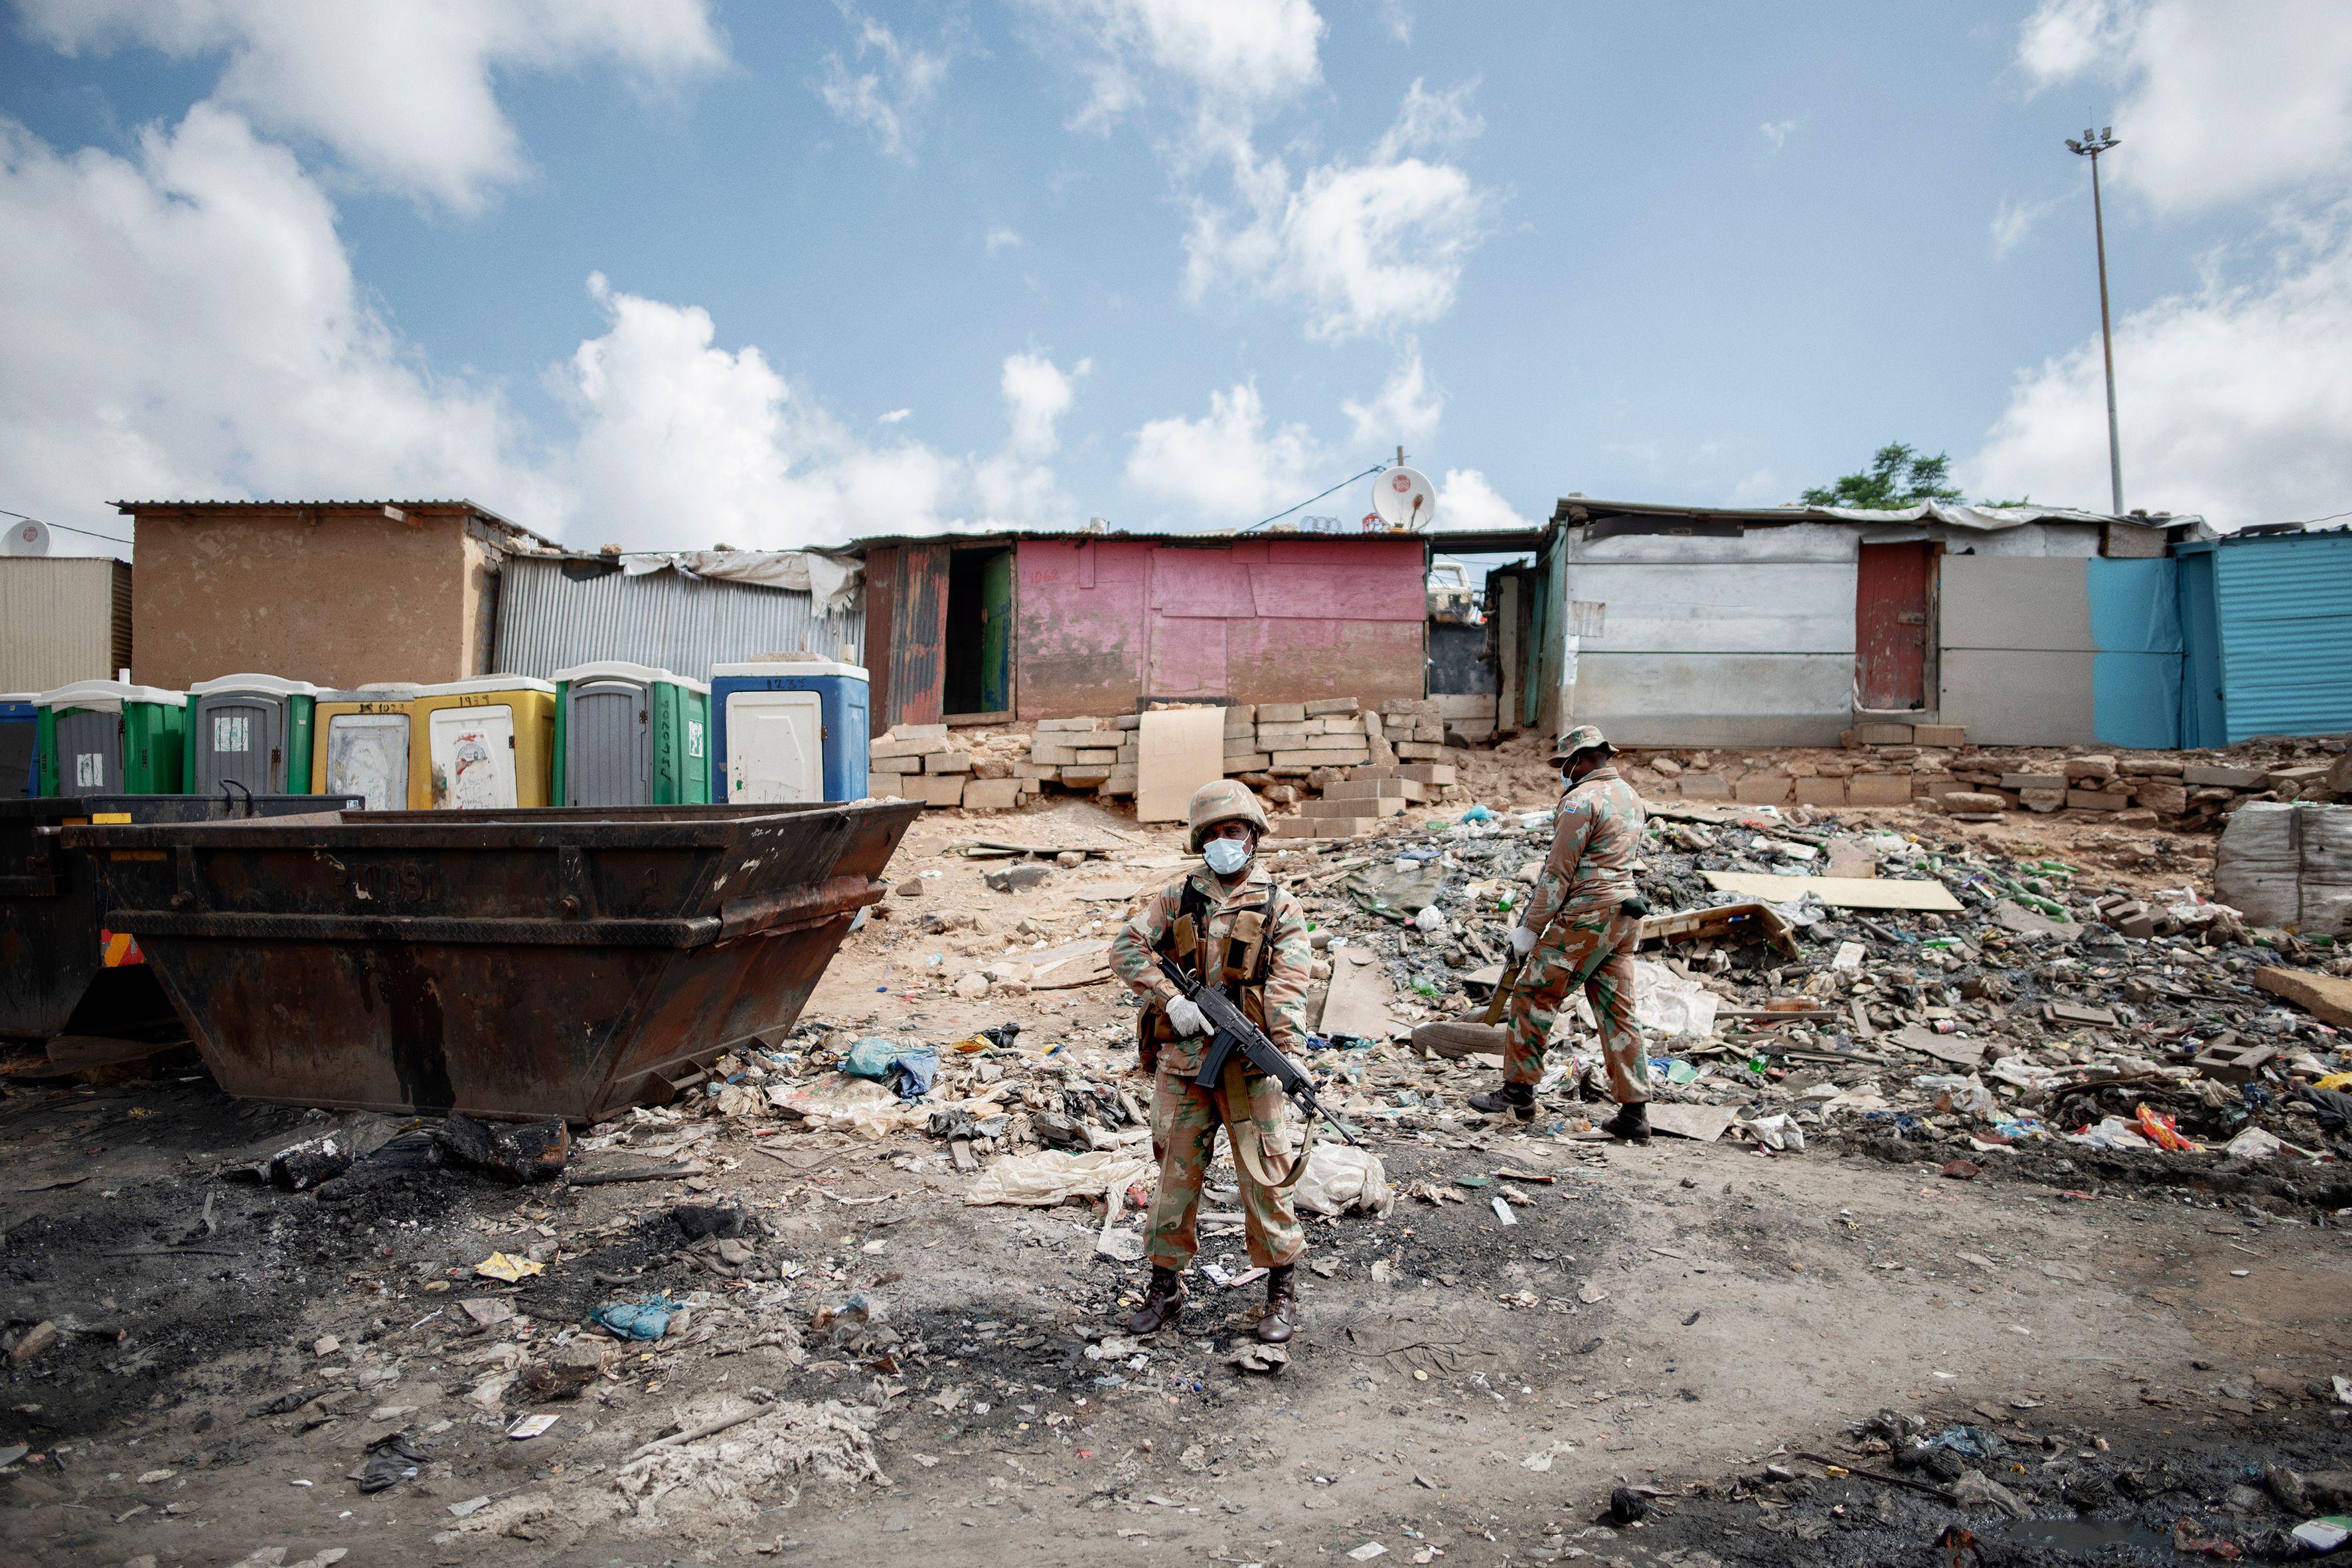 Mask-wearing troops carry guns in front of shanty houses in a South African township.